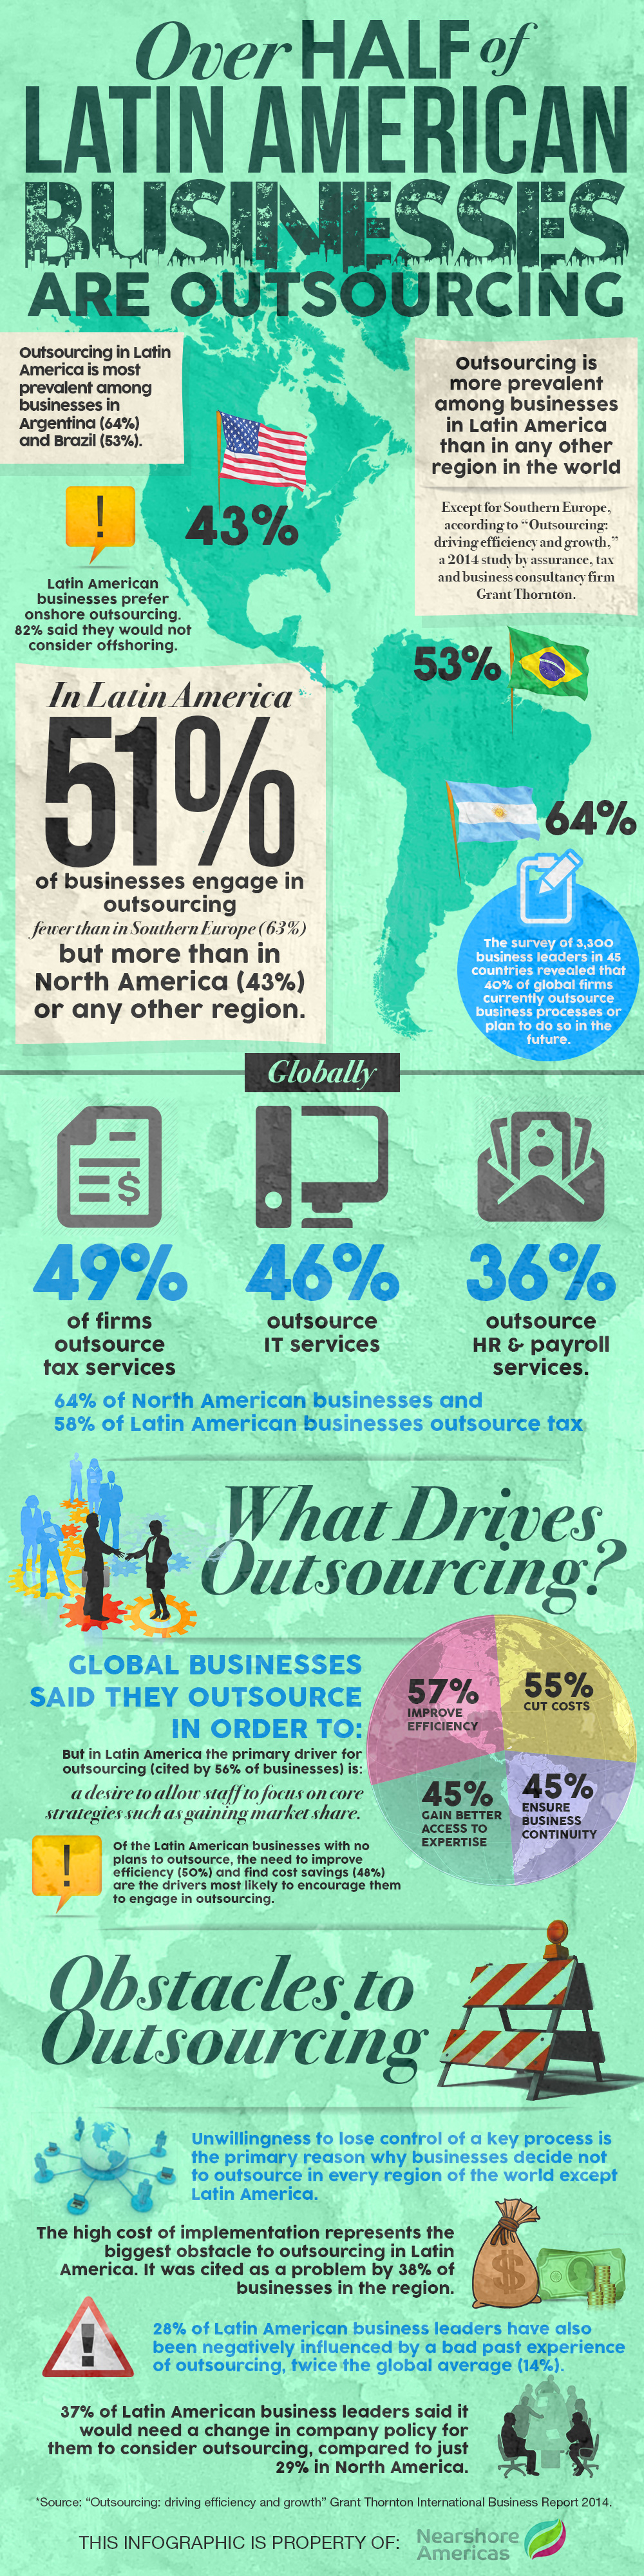 Infographic: Over Half of Latin American Businesses Are Outsourcing